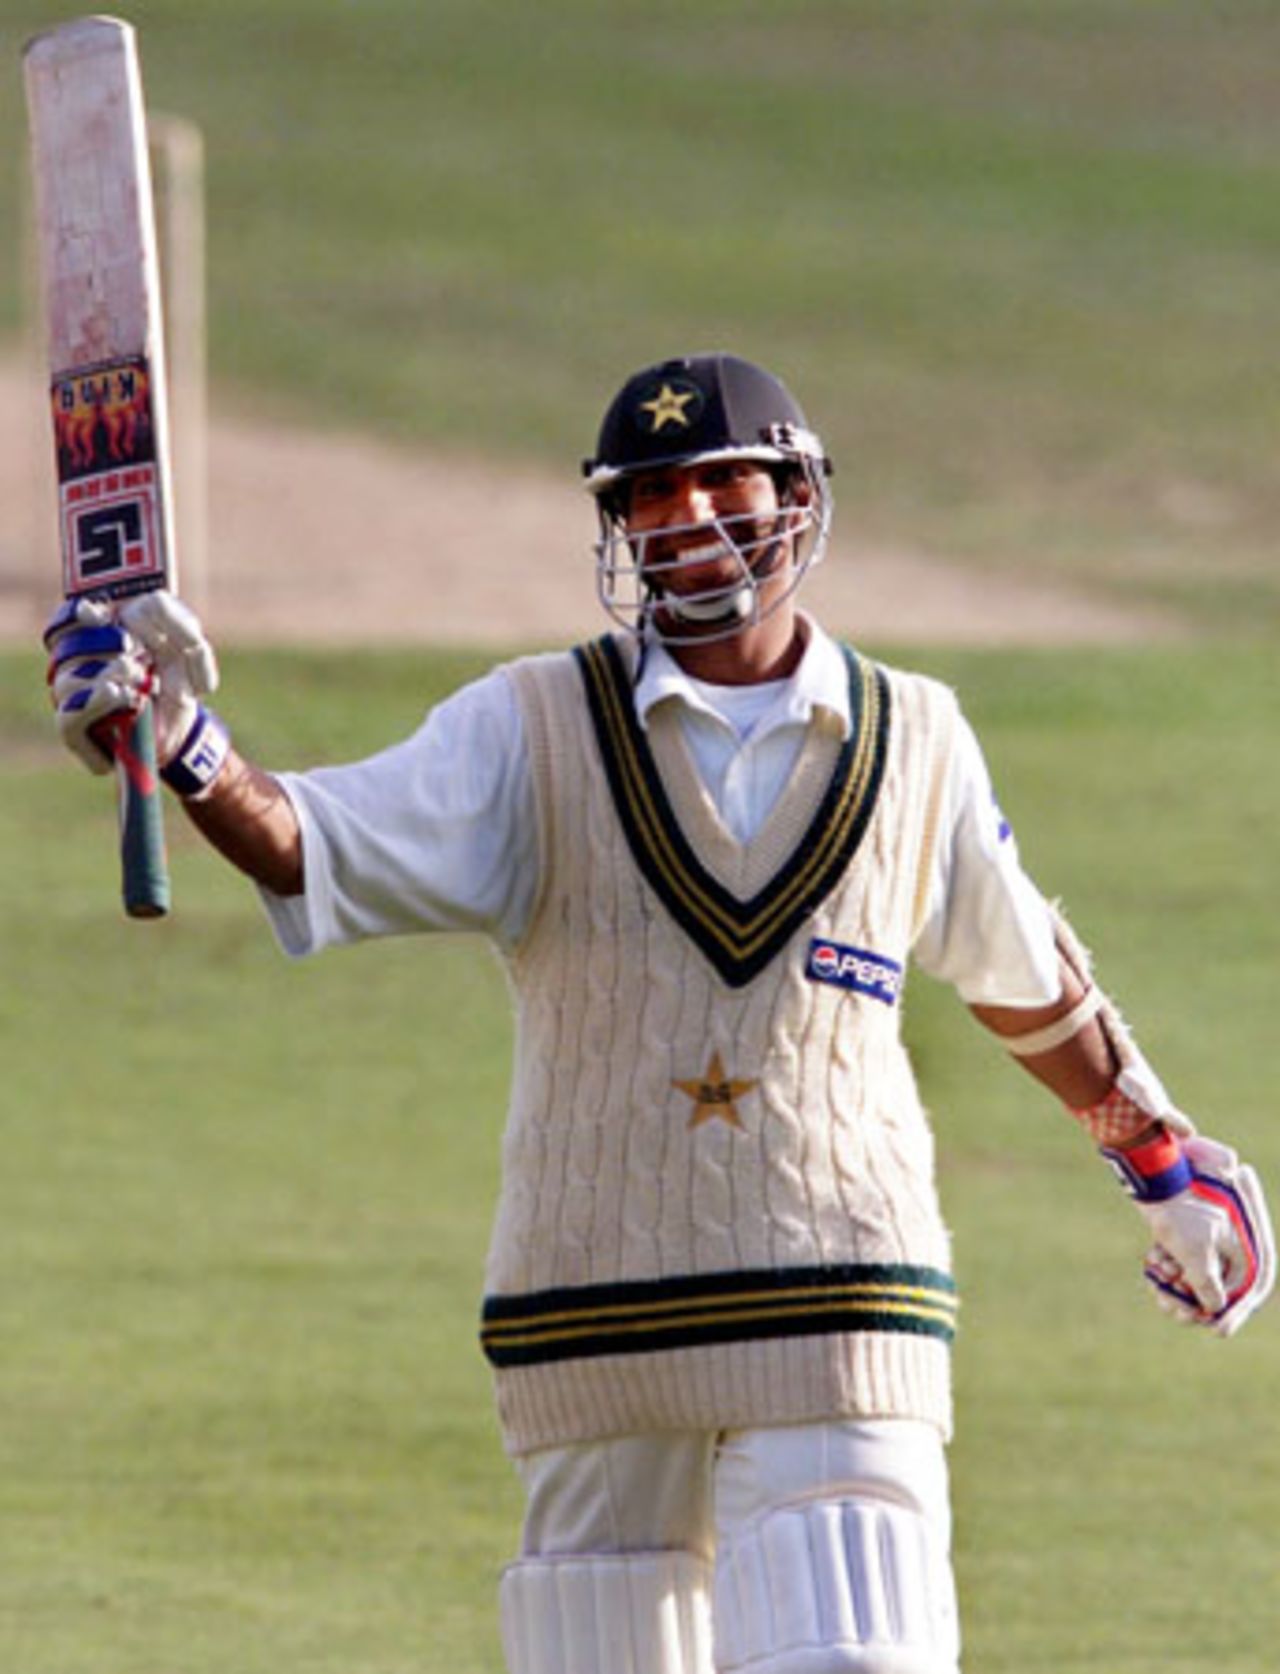 Pakistan batsman Yousuf Youhana raises his bat in celebration upon reaching 200. Yousuf went on to score 203. It is his sixth Test century and highest first-class score. 2nd Test: New Zealand v Pakistan at Jade Stadium, Christchurch, 15-19 March 2001 (18 March 2001).